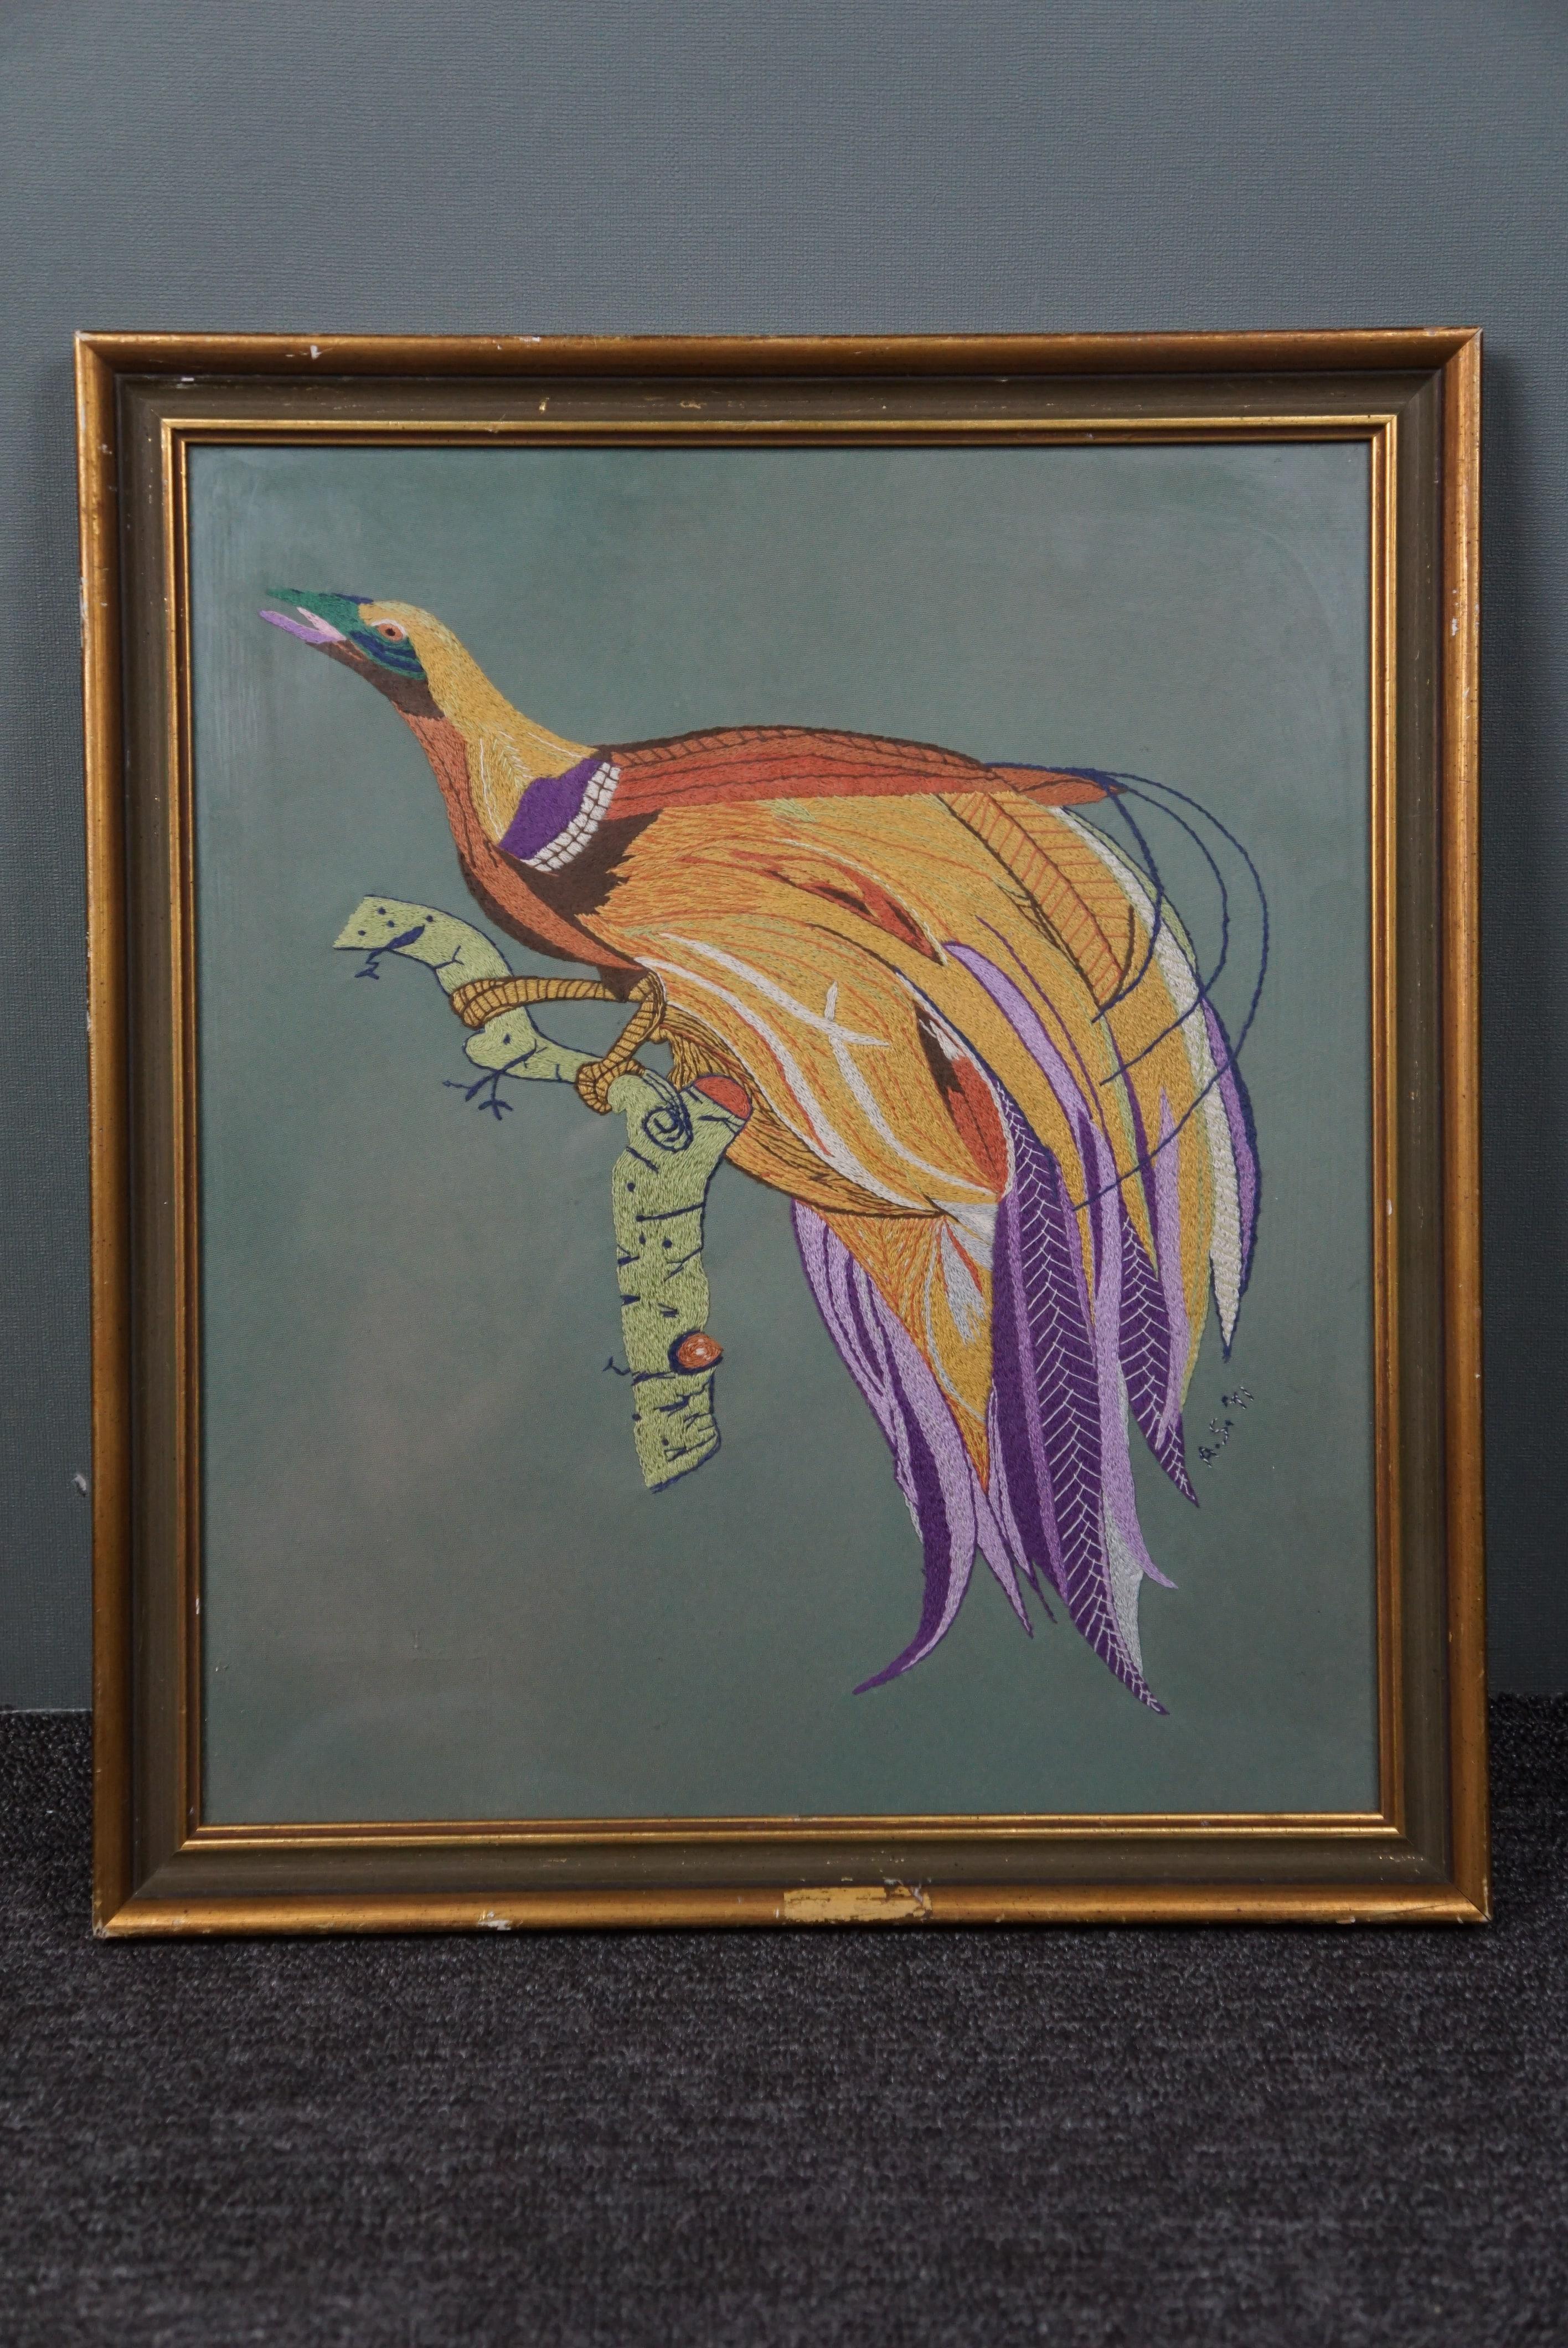 Offered is this embroidered image of a colorful bird.
This beautiful handmade image of a bird of paradise is fully embroidered. If you look at the artwork up close you will see every detail of the yarn made with the so-called 'New England stitch'. A